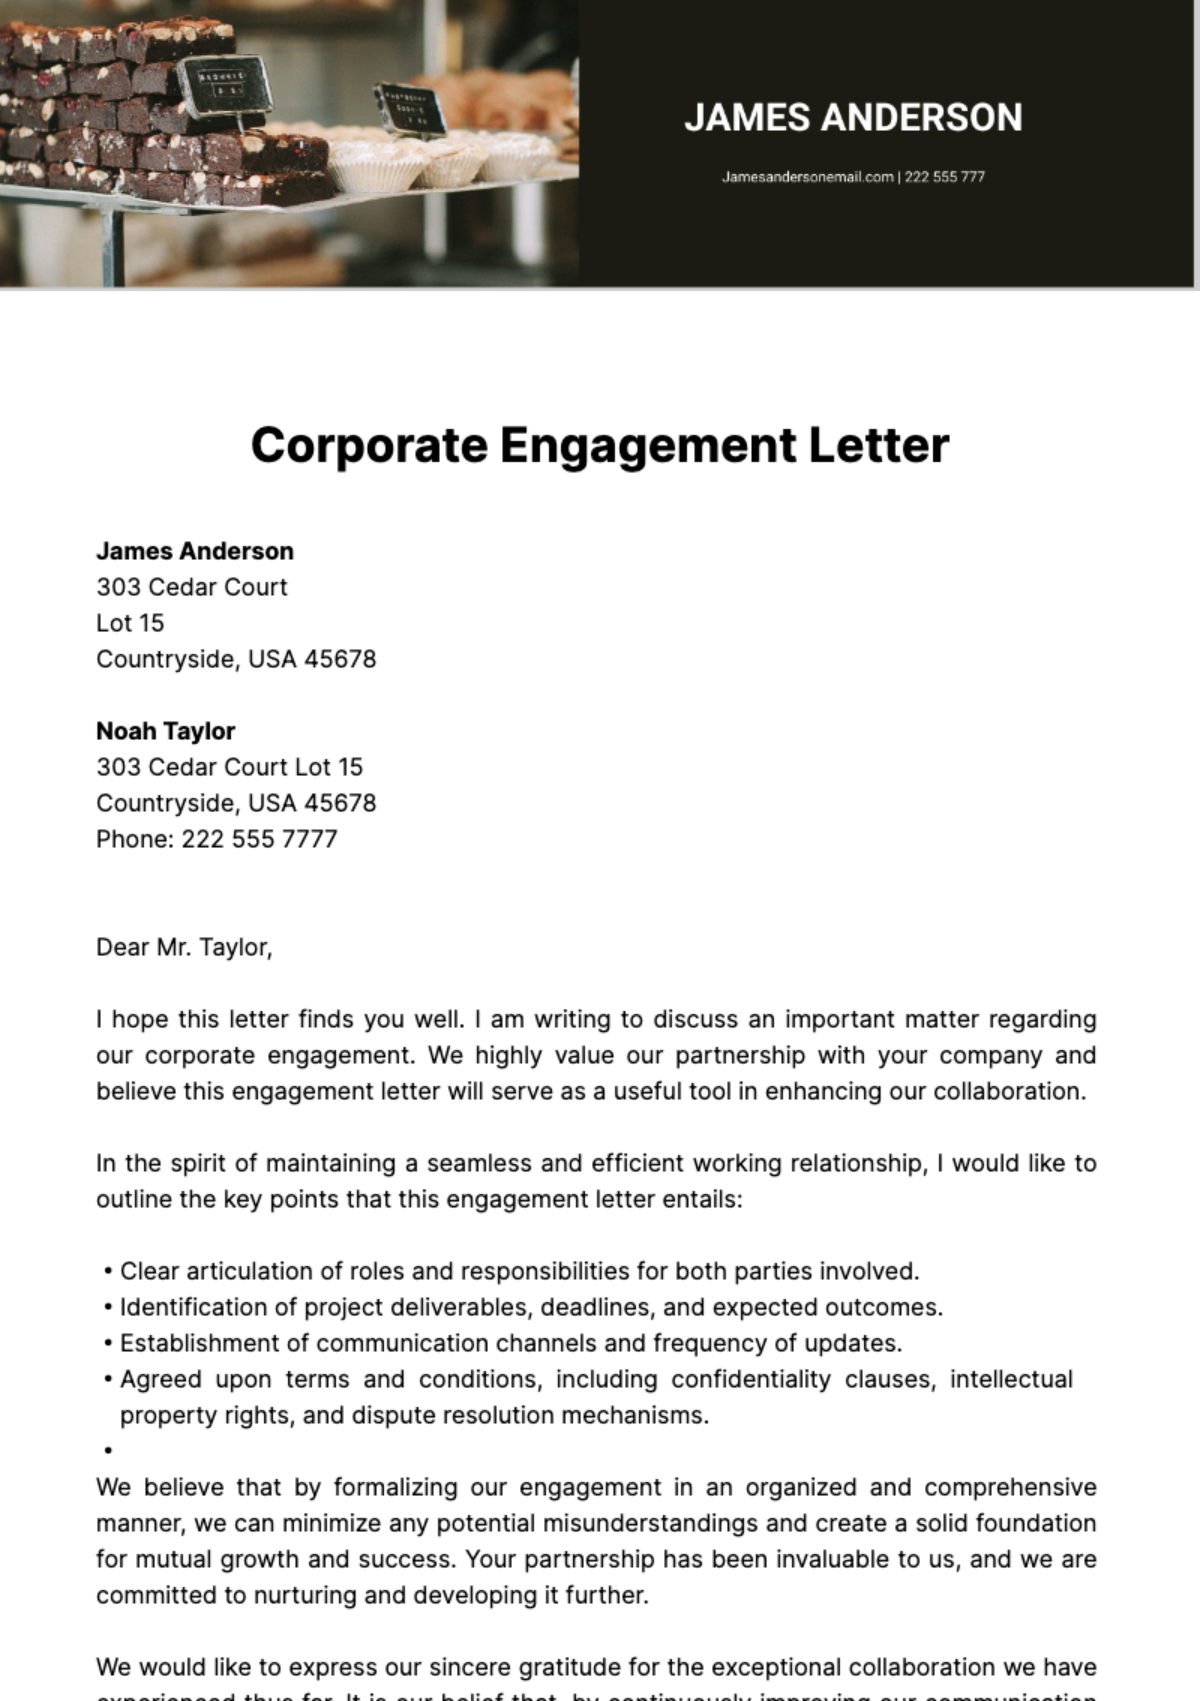 Free Corporate Engagement Letter Template